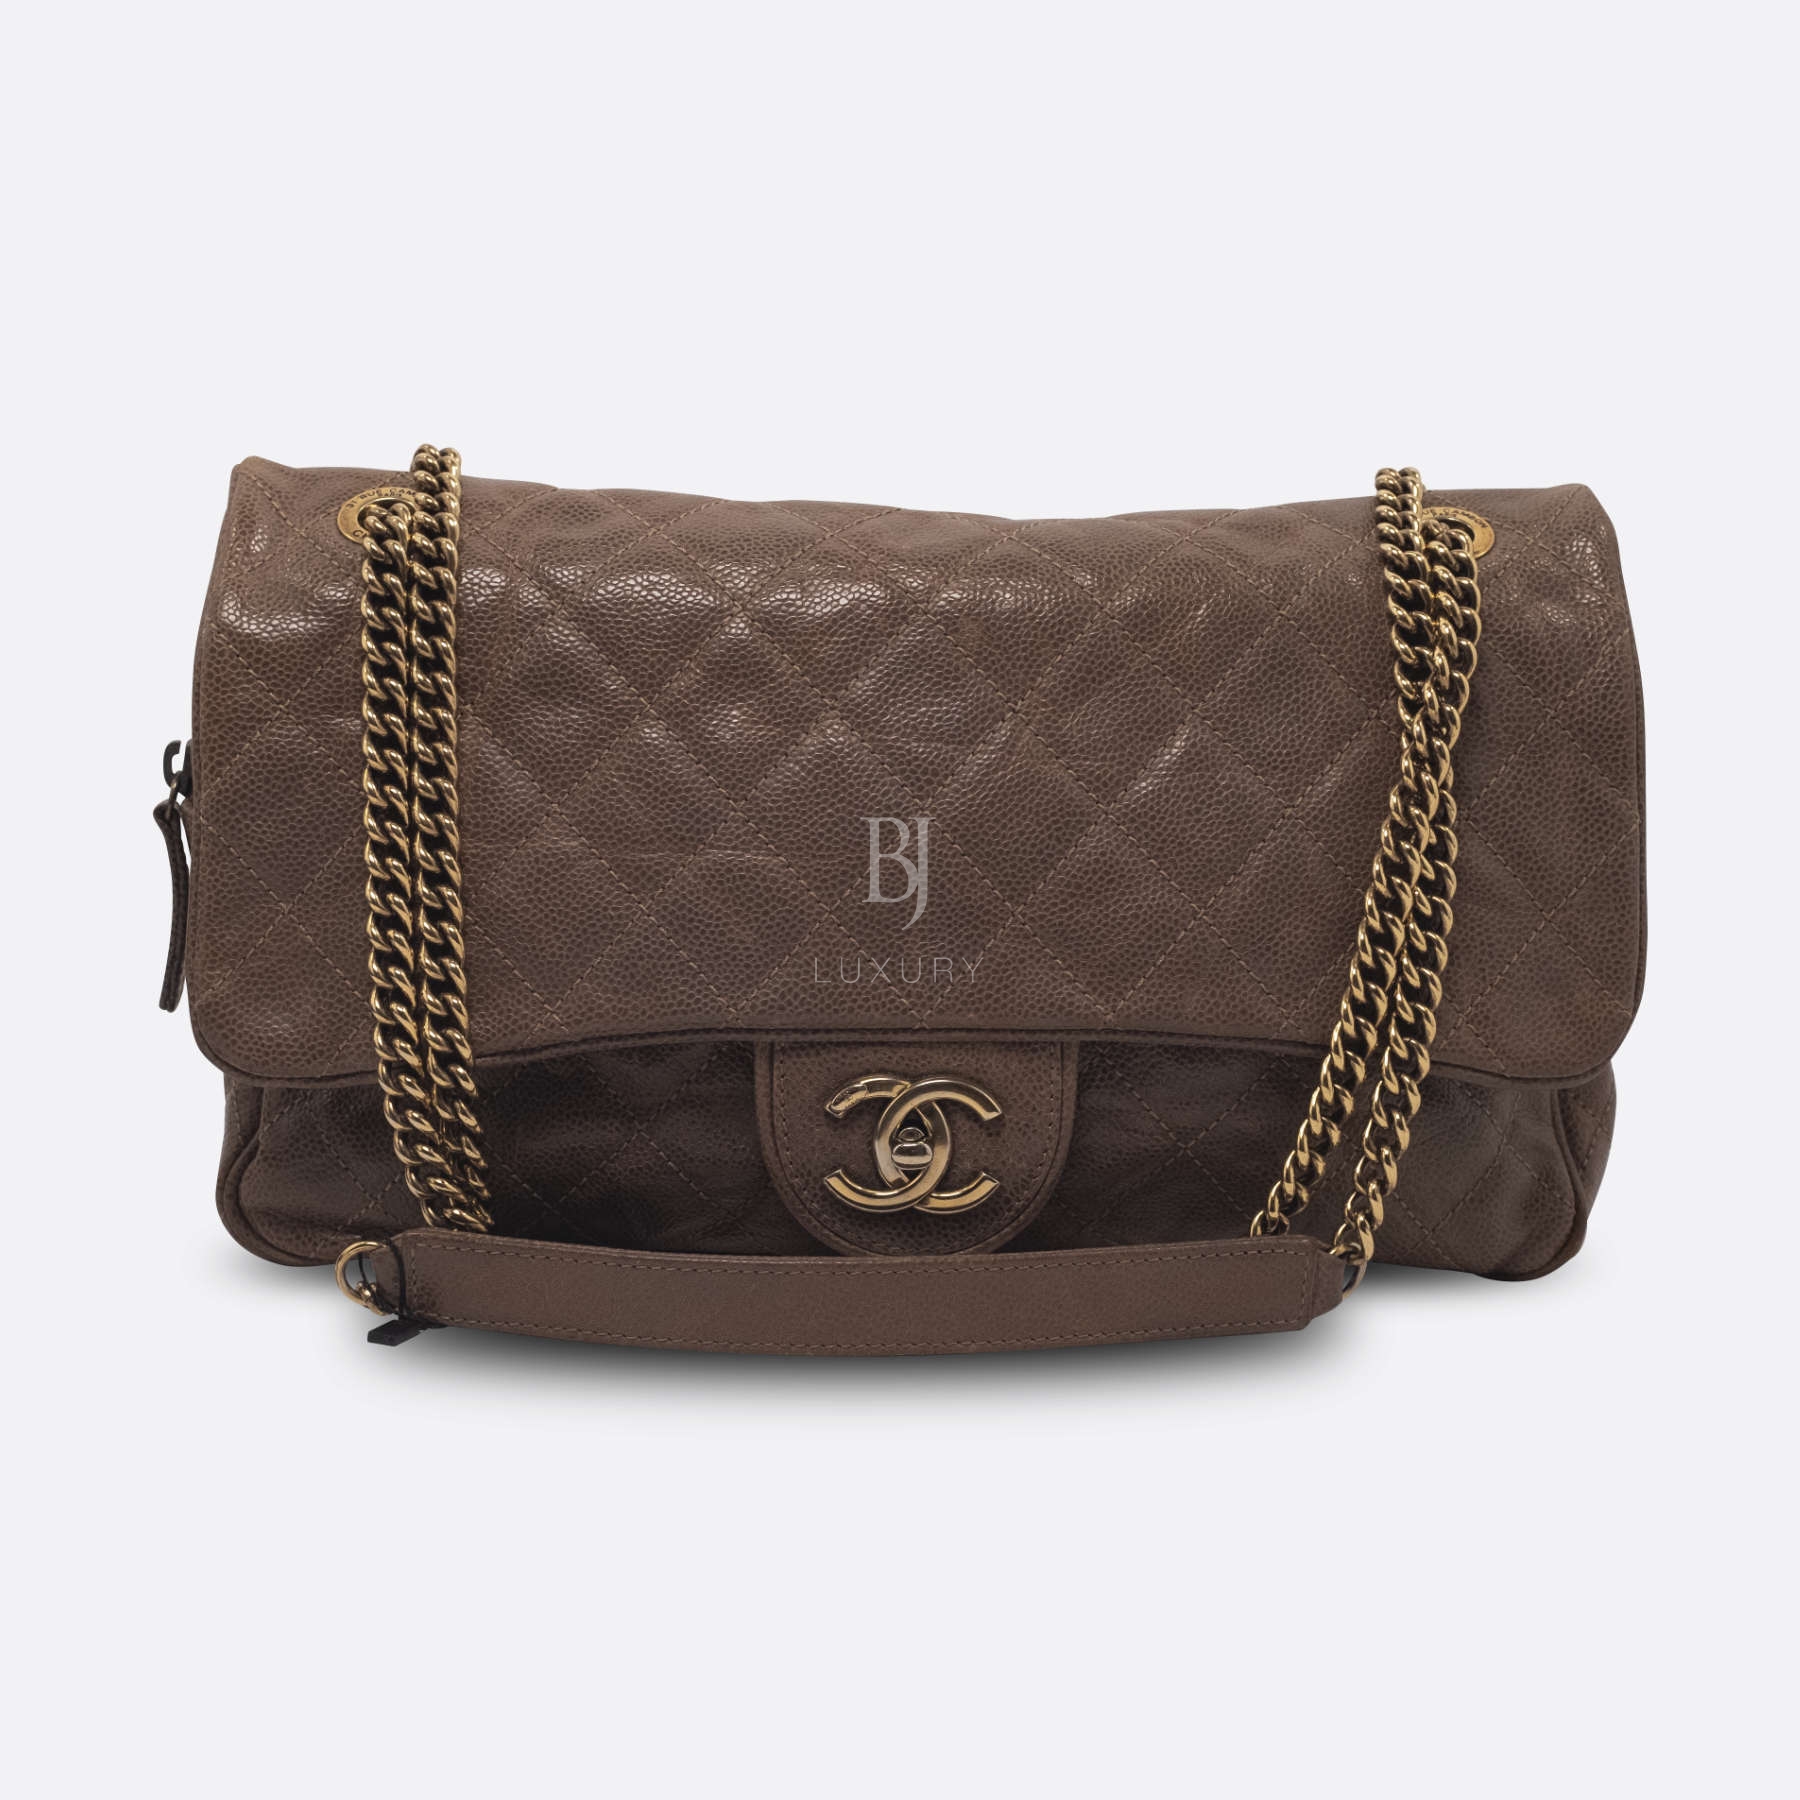 CHANEL-FLAPBAG-LARGE-BROWN-CAVIAR-4220 front with strap.jpg